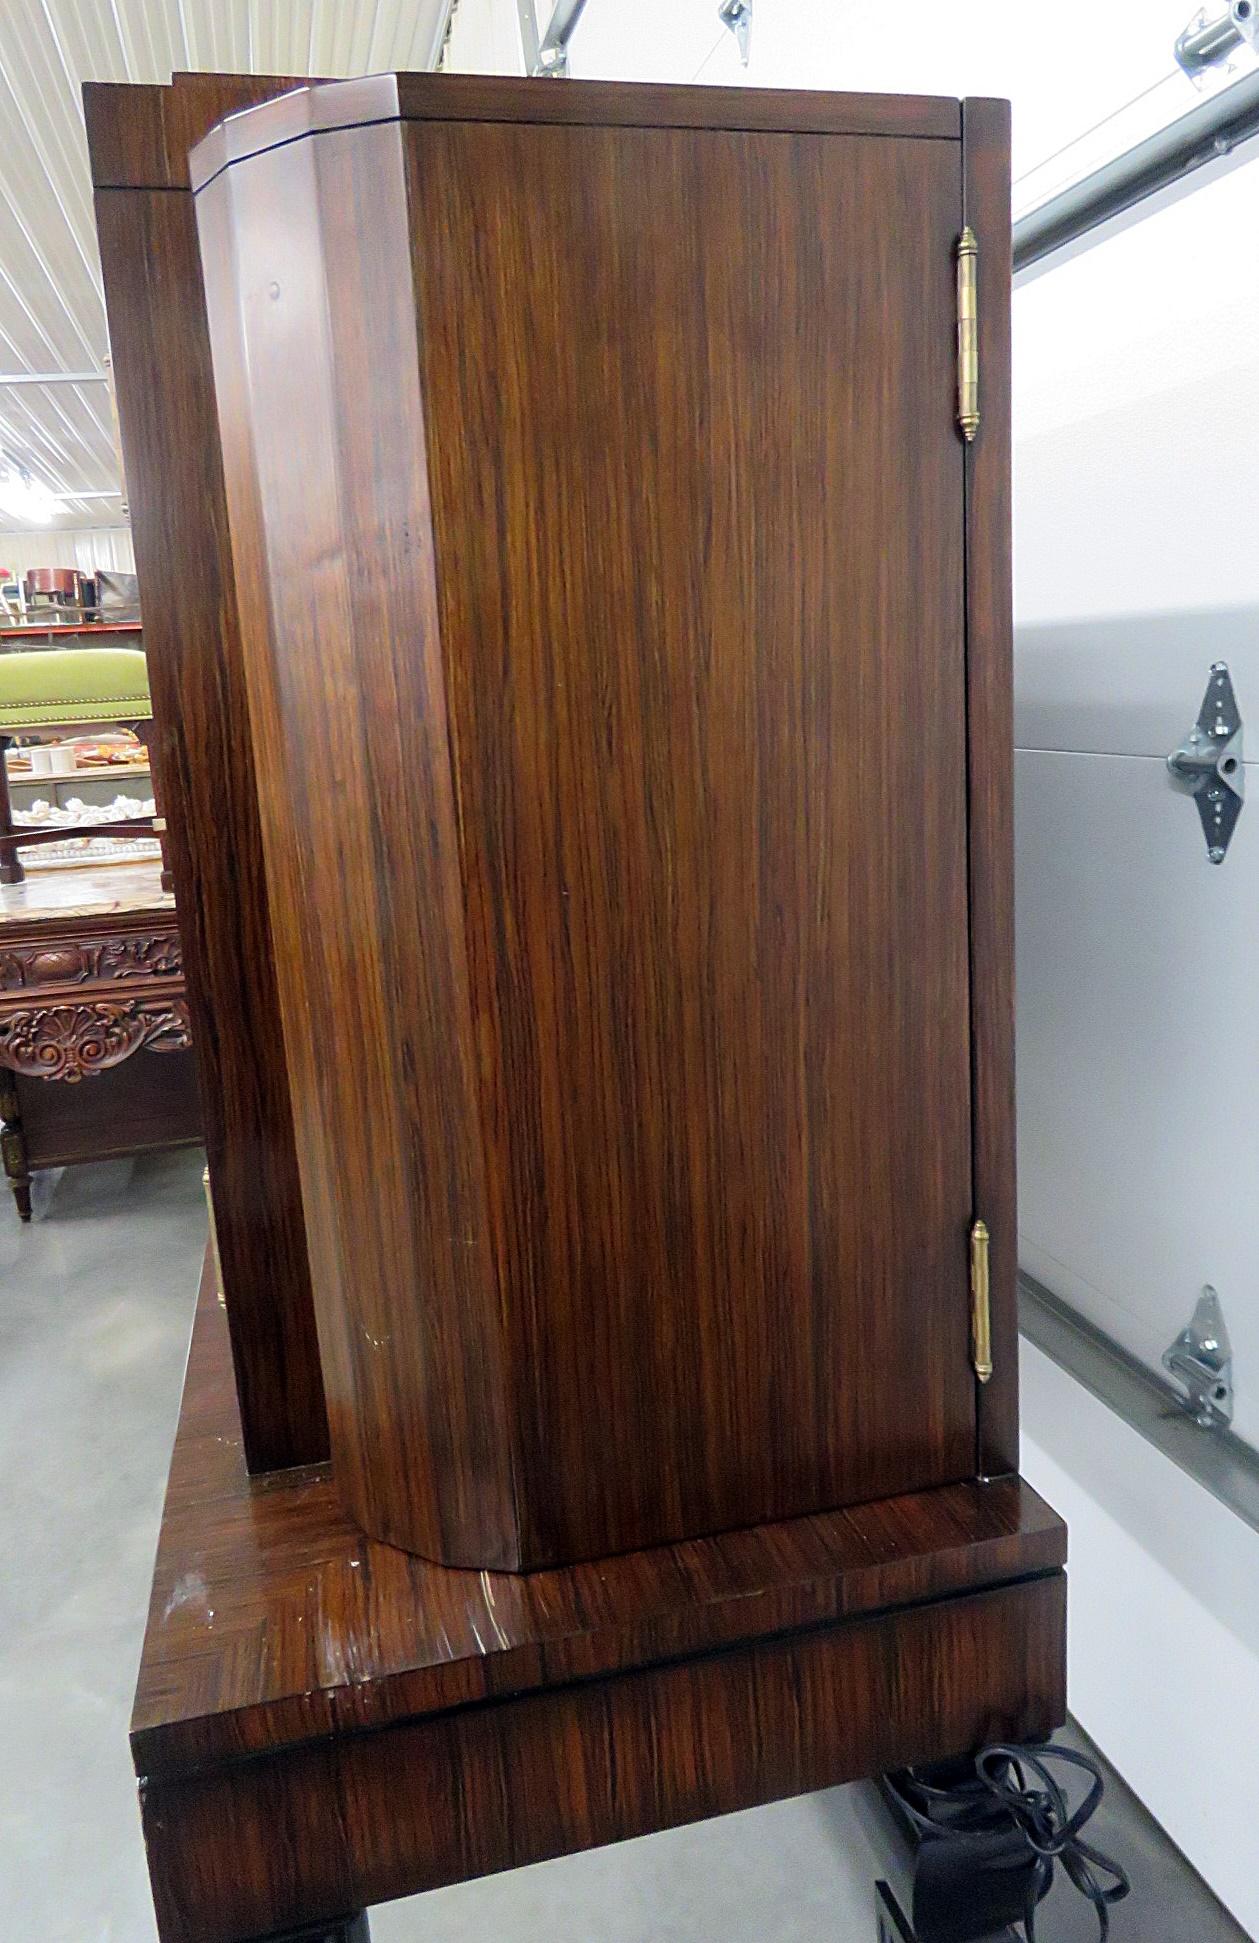 Art Deco style rosewood bar with ebonized legs and accents. Each side door holds 1 glass shelf. The centre doors contain 2 glass shelves.